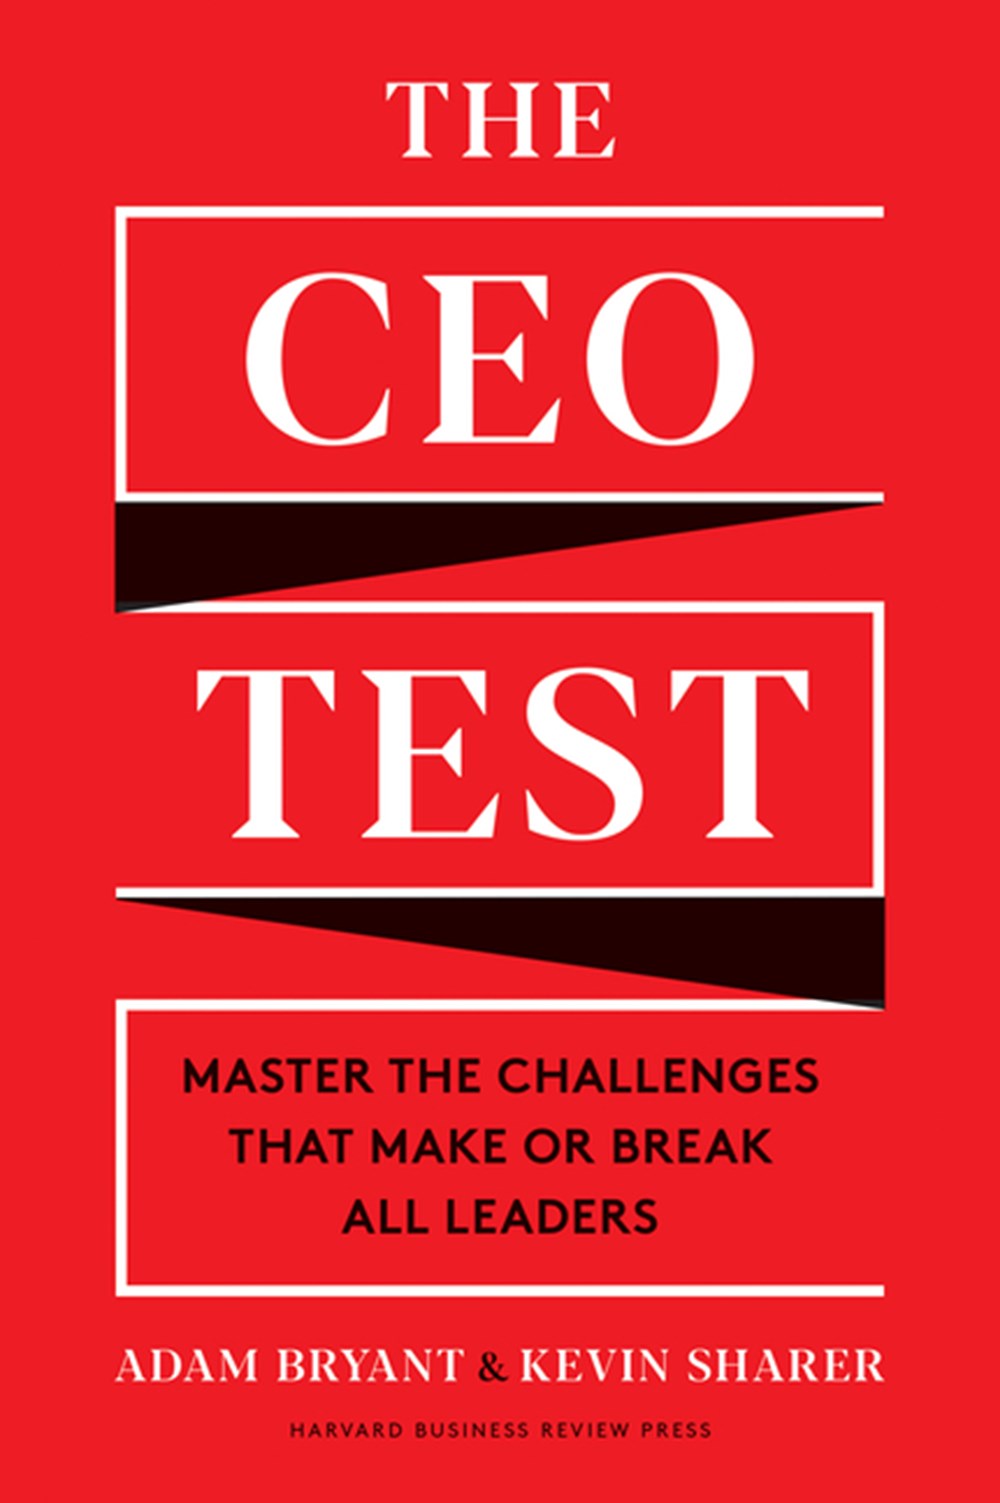 CEO Test Master the Challenges That Make or Break All Leaders